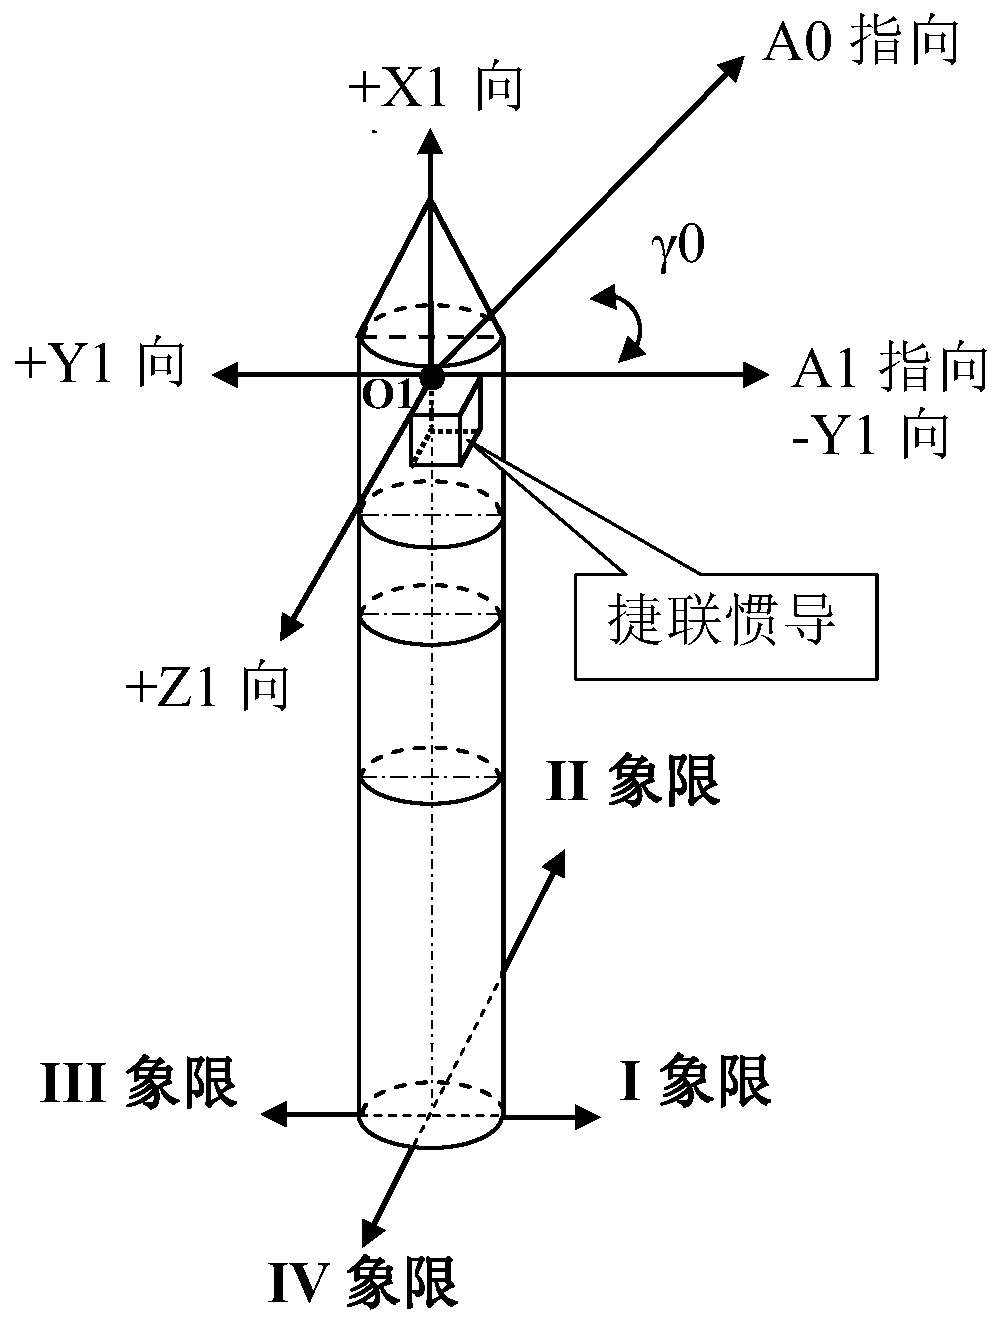 Omni-directional launch control method and device for carrier rocket as well as computer equipment